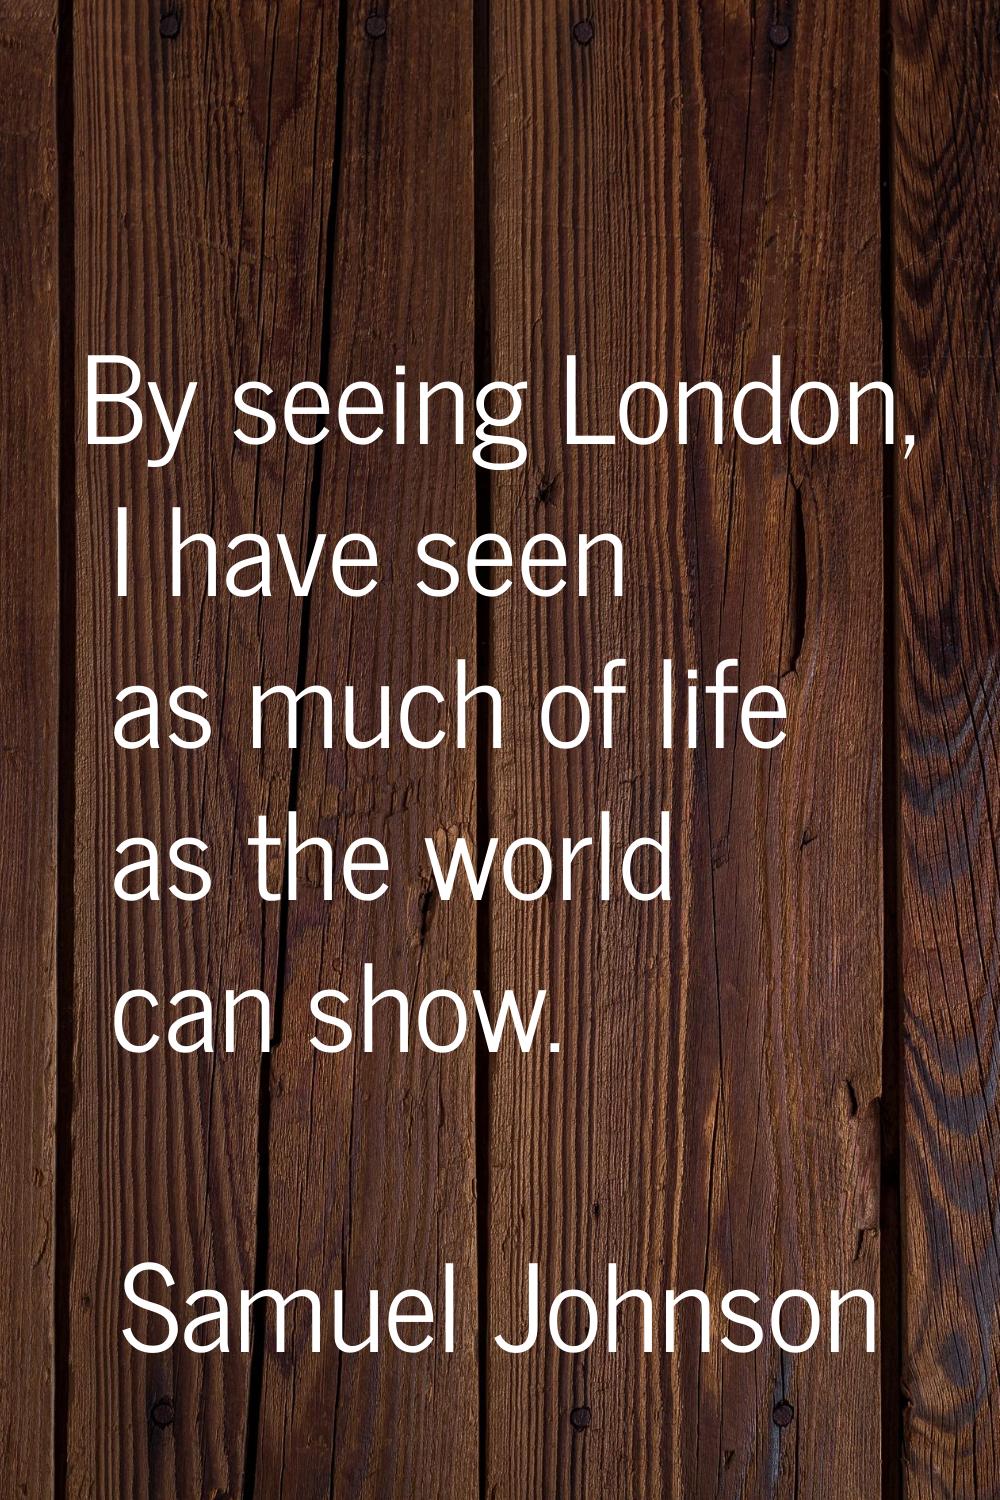 By seeing London, I have seen as much of life as the world can show.